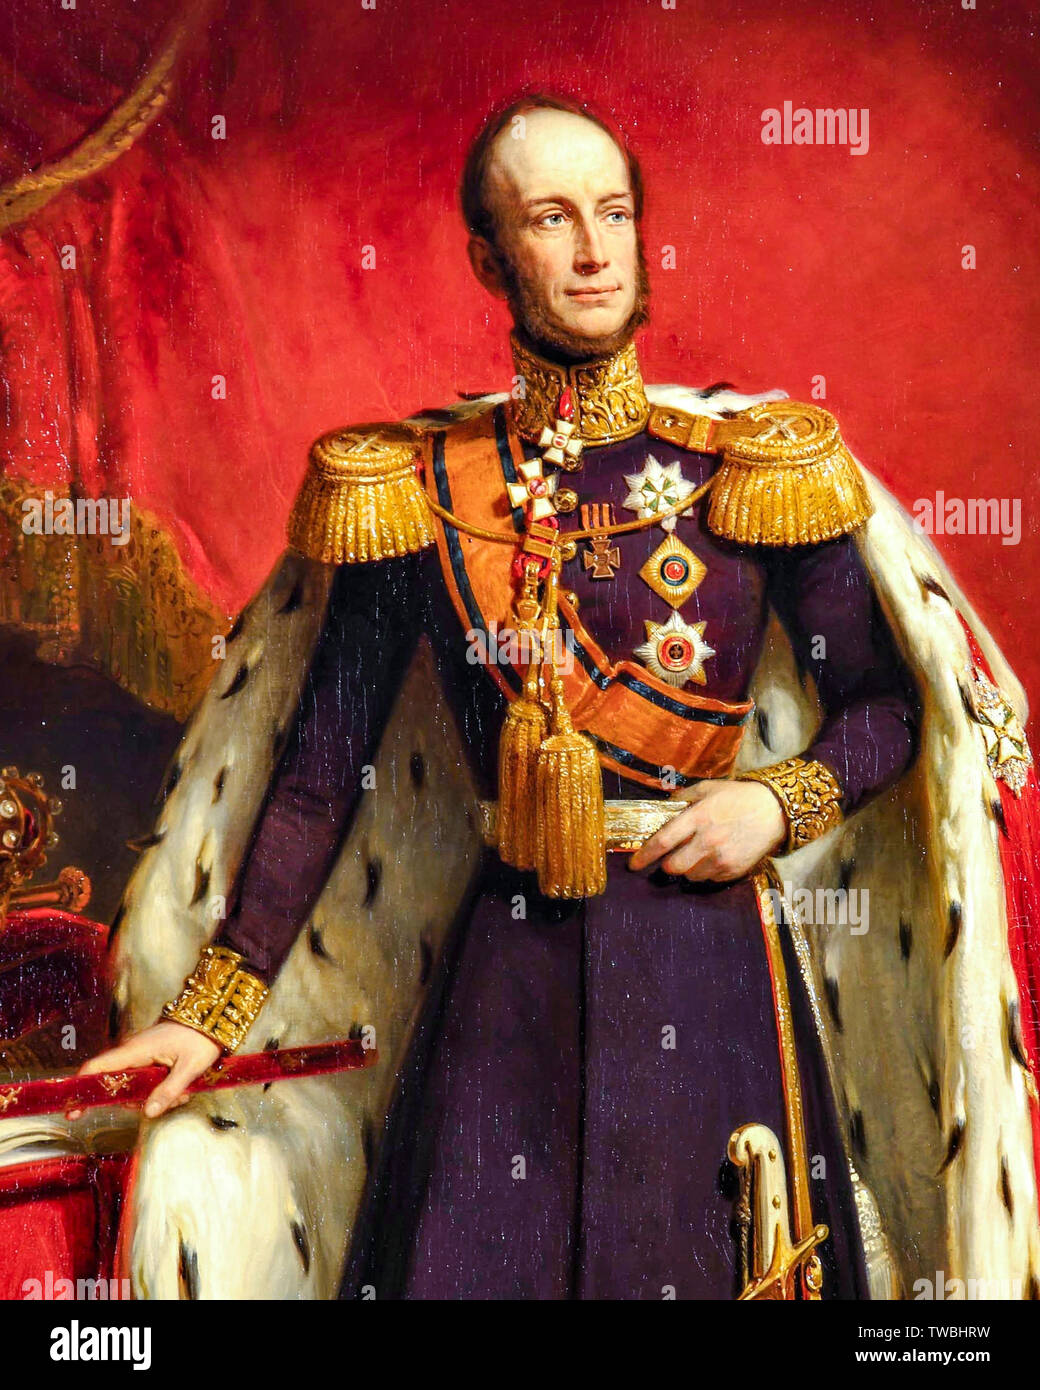 King William II of the Netherlands (1792-1849), portrait painting detail, 1849 Stock Photo